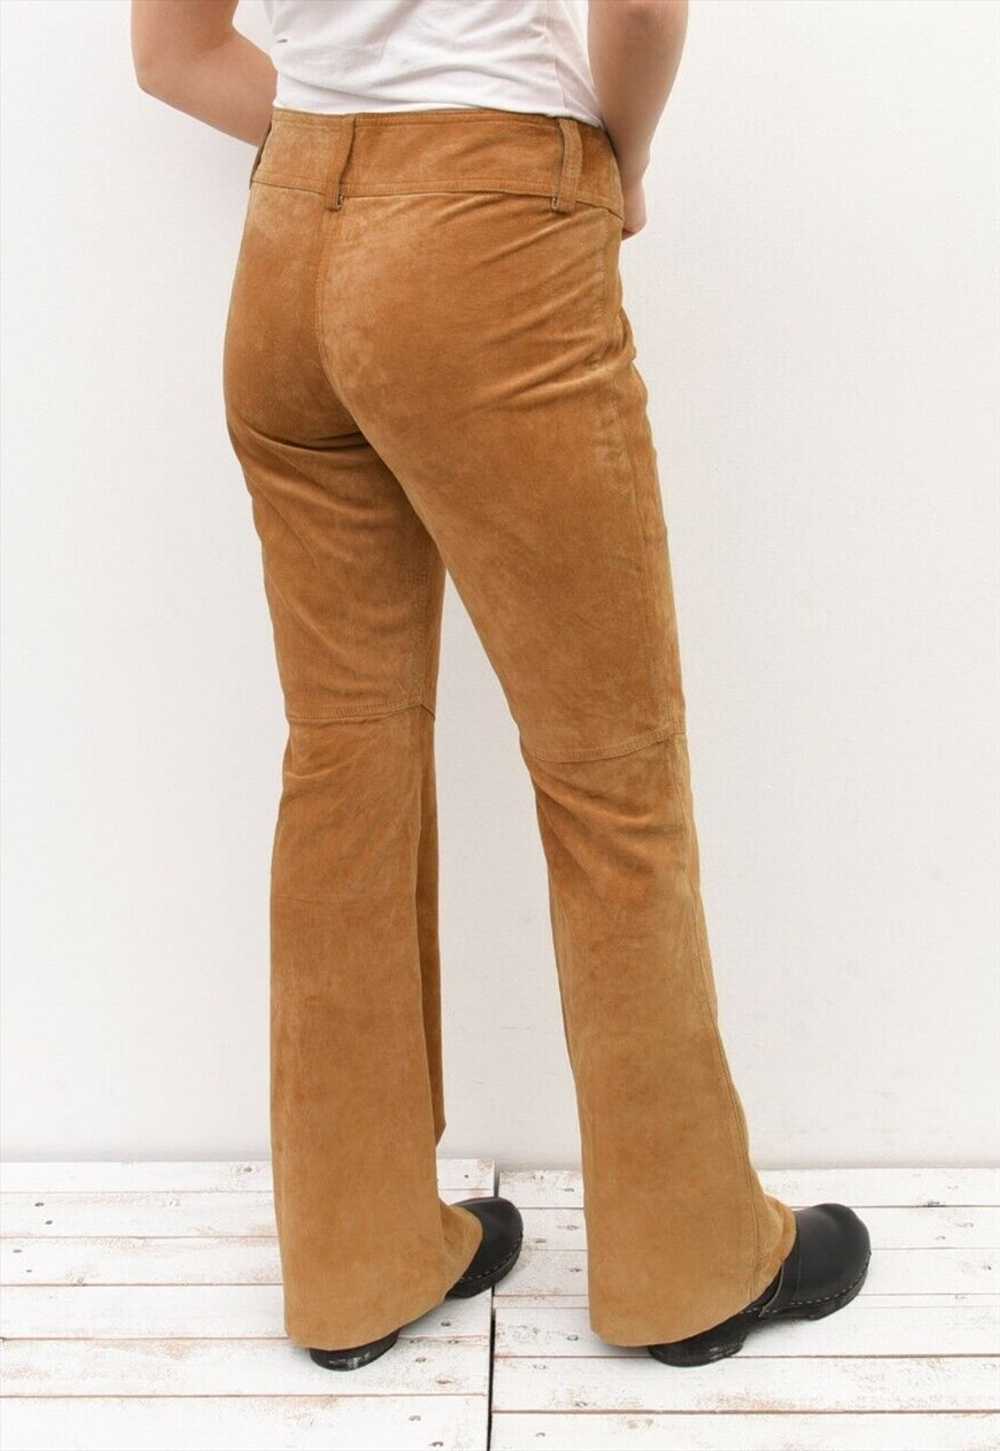 W33 L33 Suede Leather Pants Cowboy Trousers Bootc… - image 2